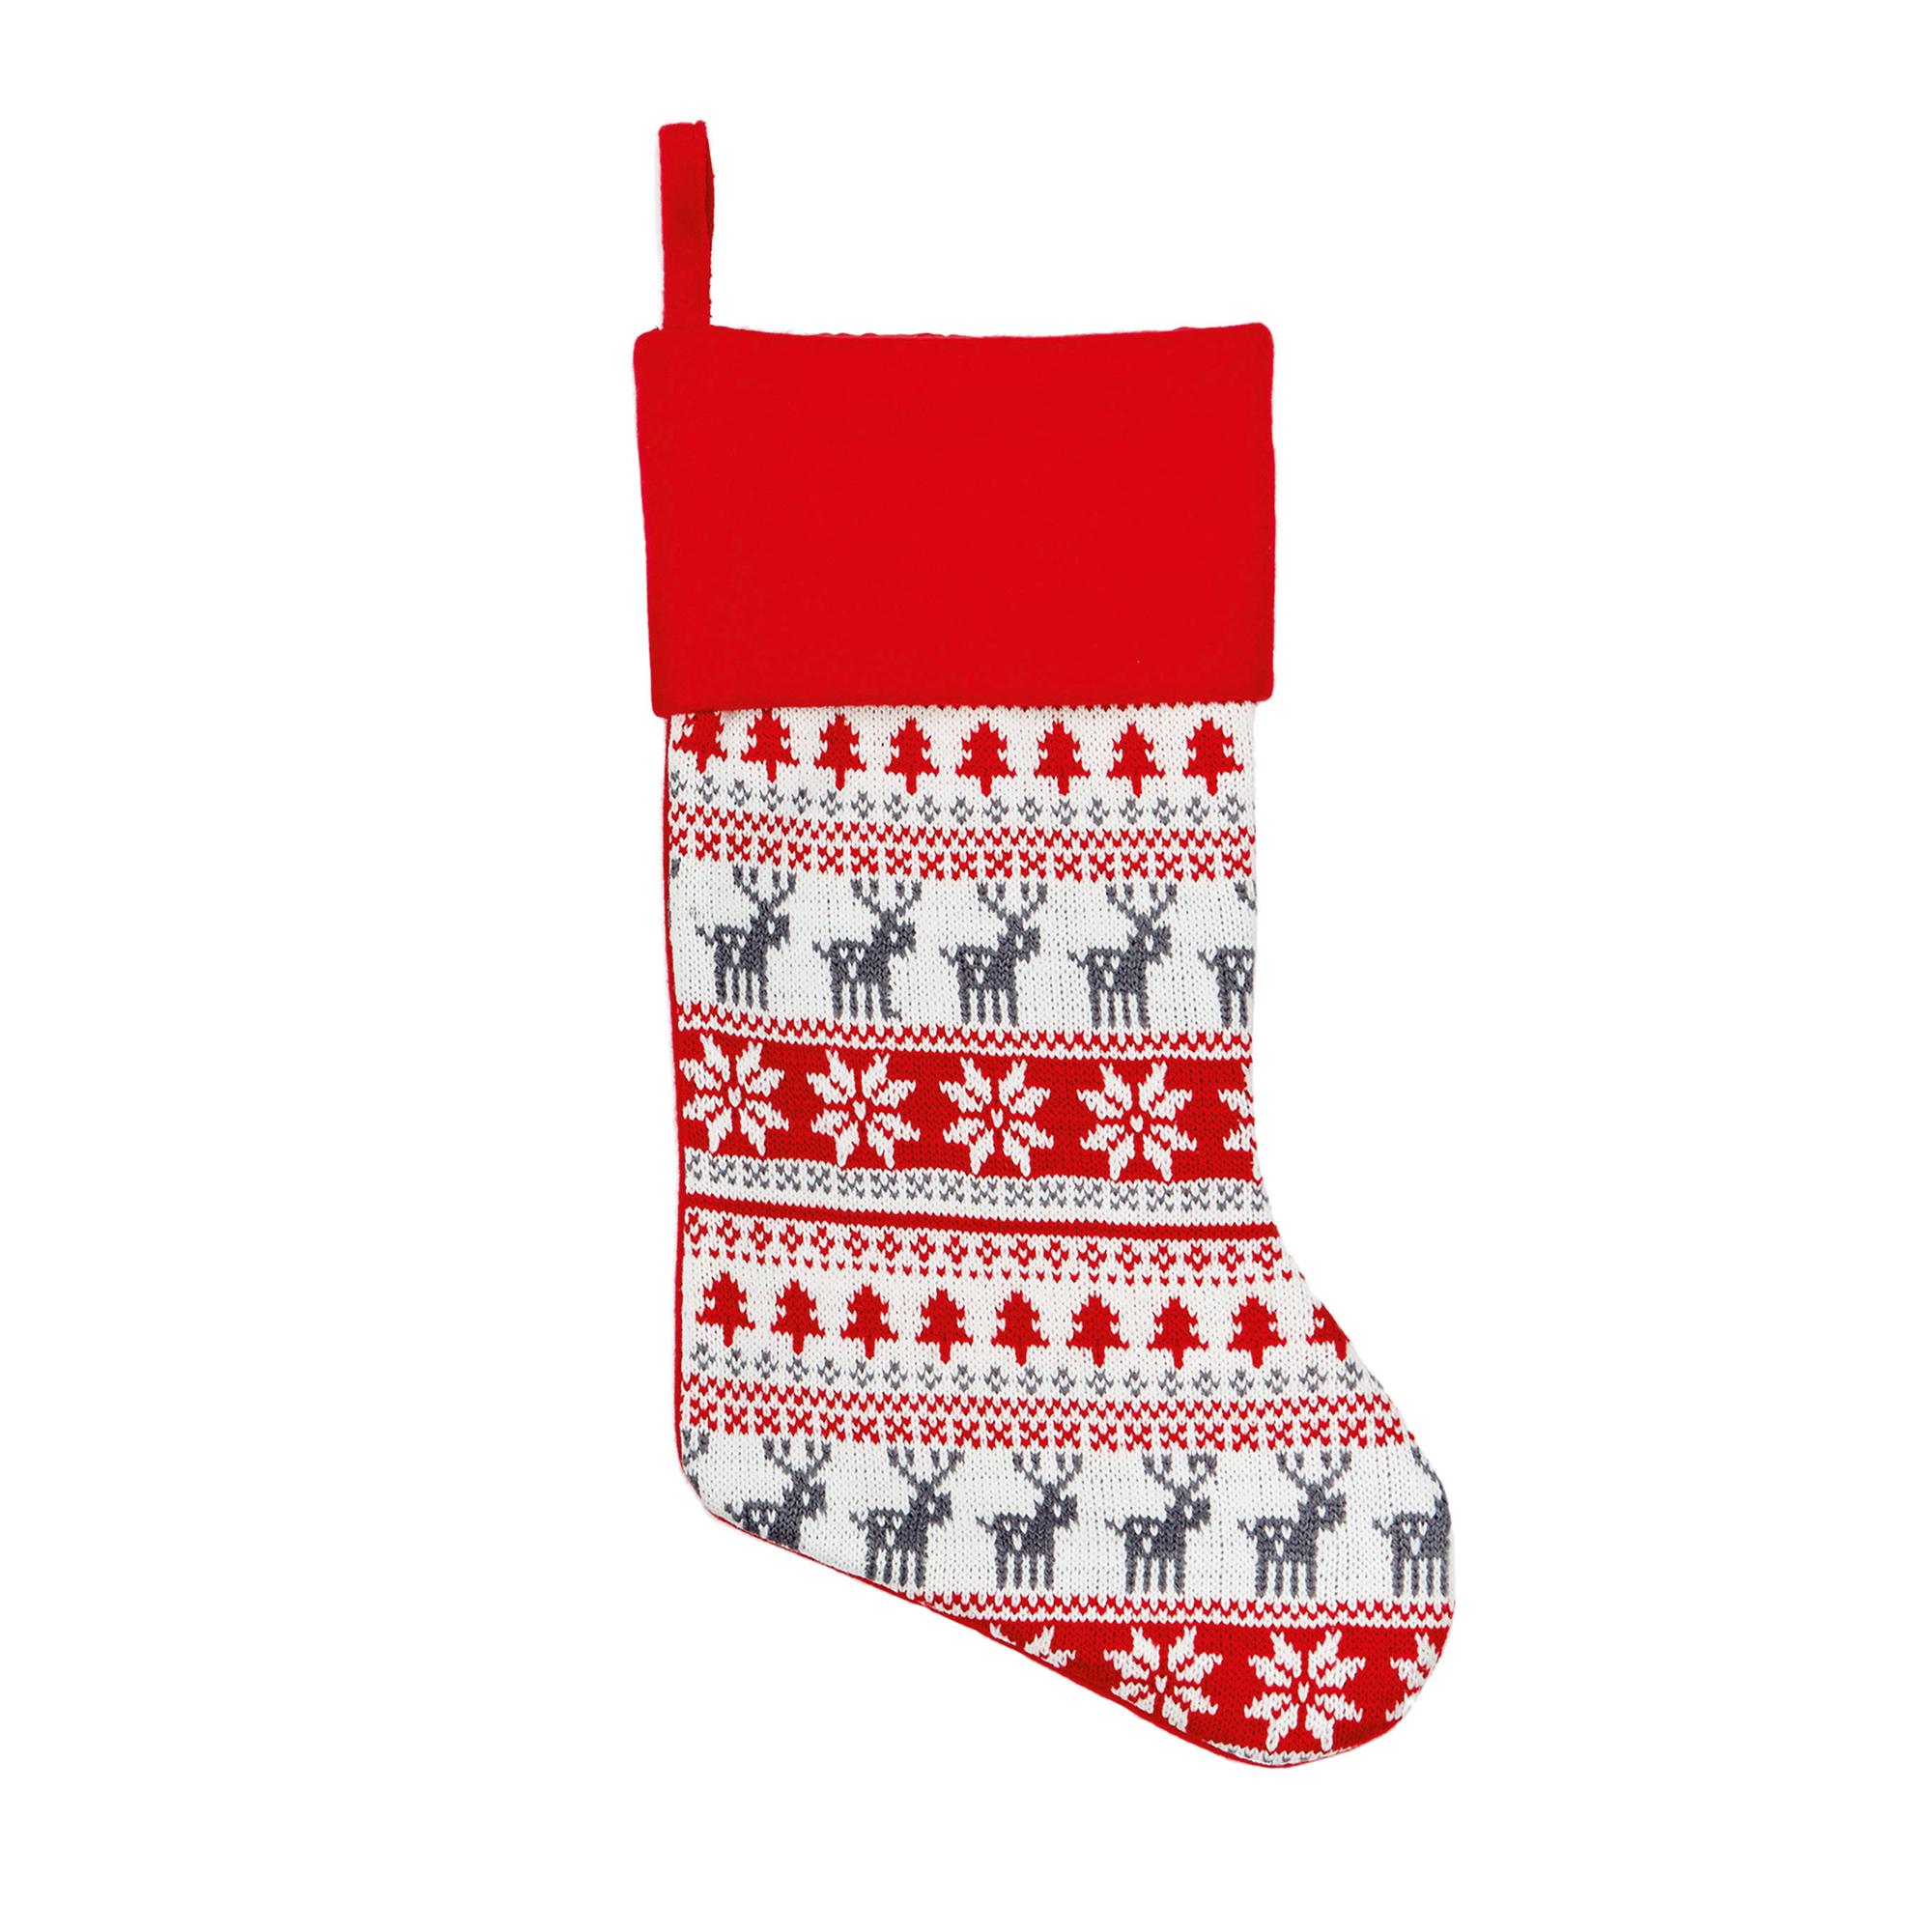 Knitted Red Scandi Christmas Stocking | Cancer Research UK Online Shop